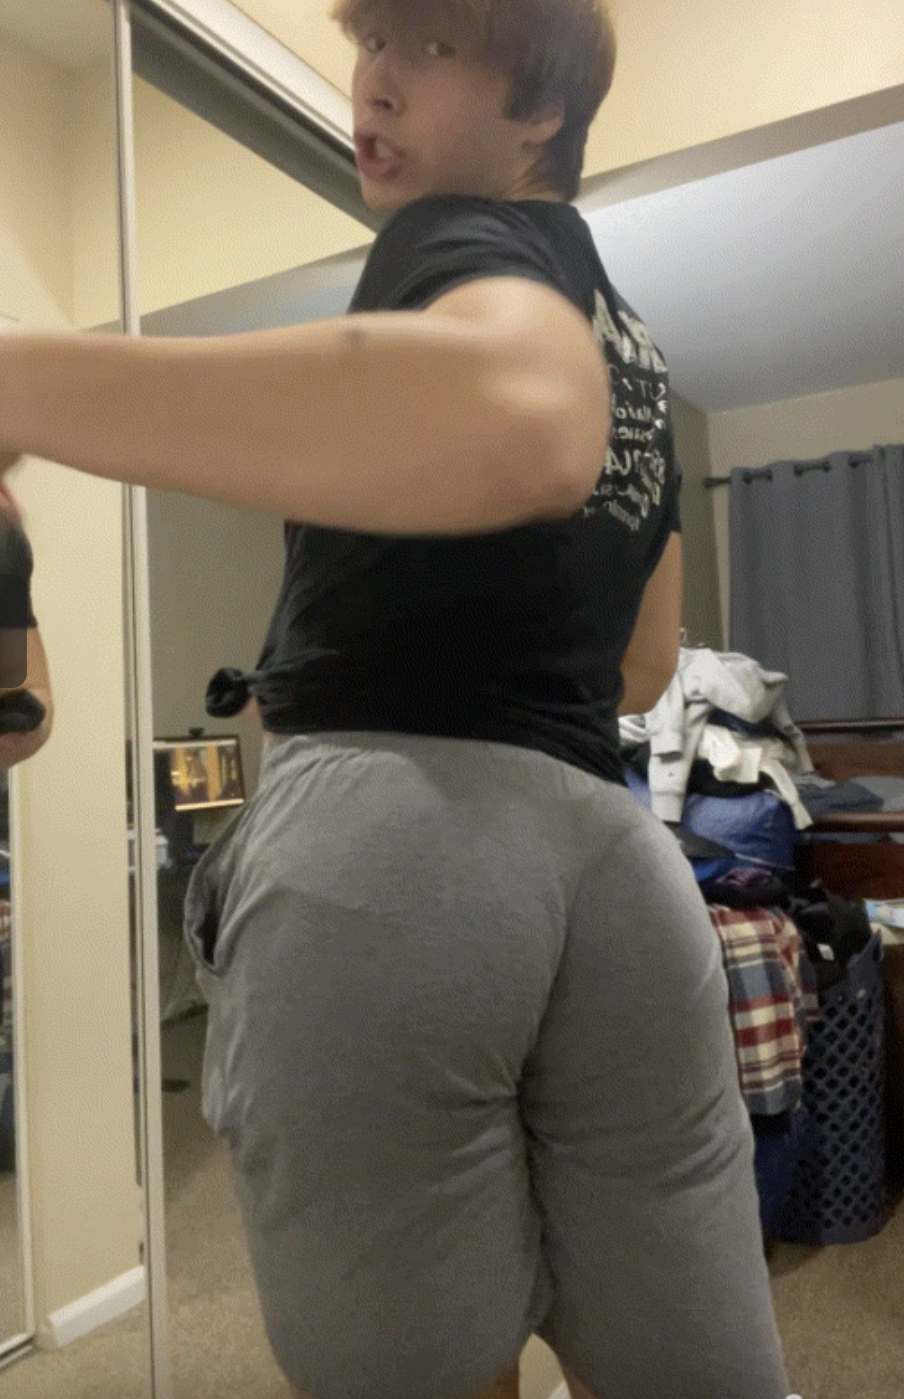 Straight boy shows off fat butt for attention